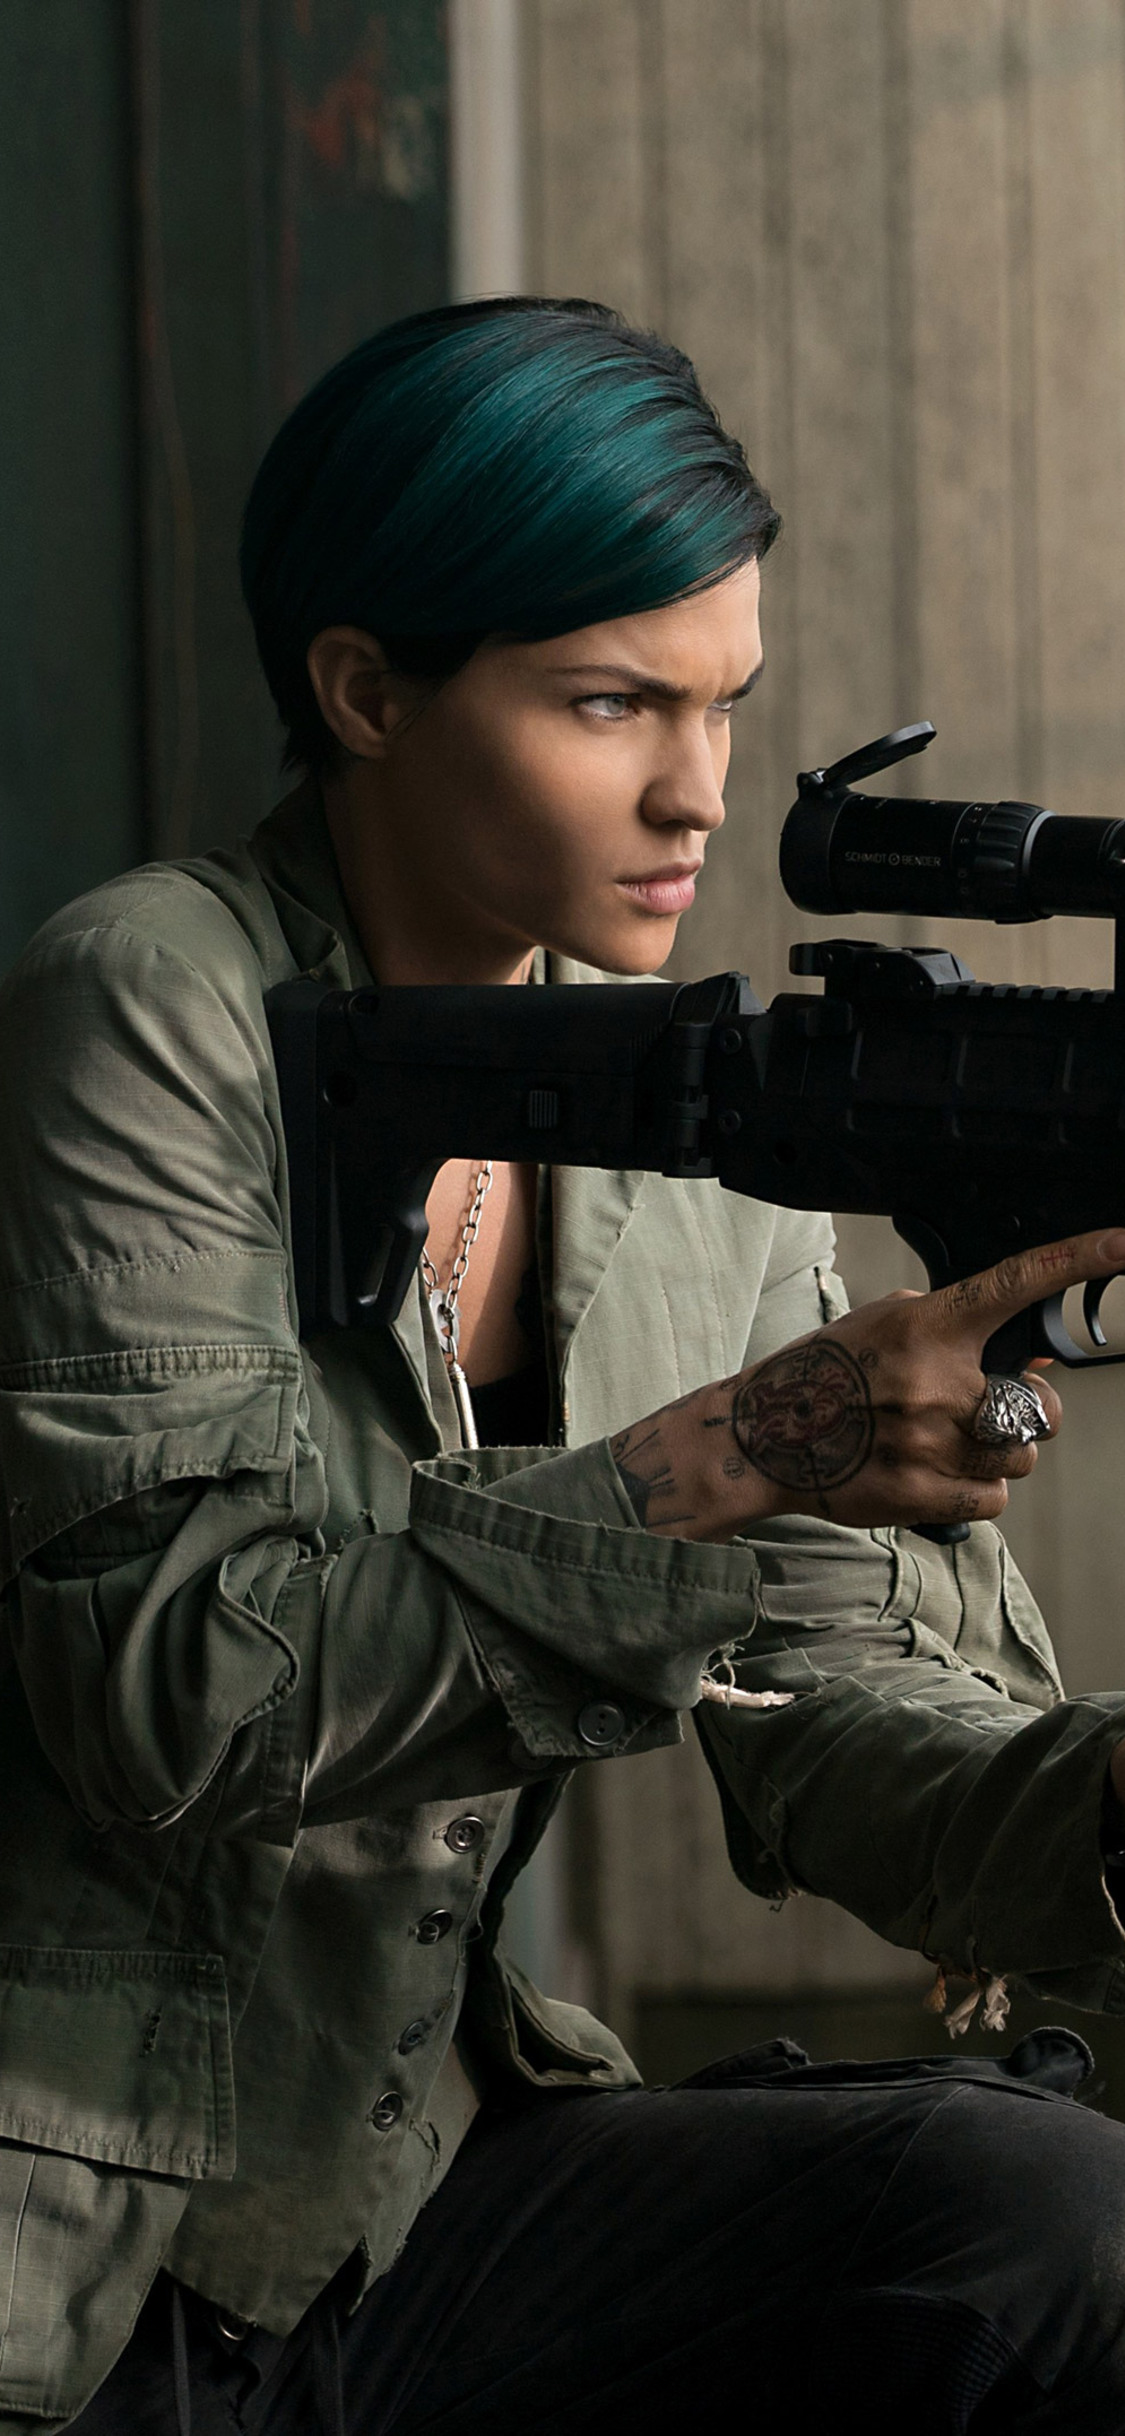 Ruby Rose In XXX Return of Xander Cage Wallpapers